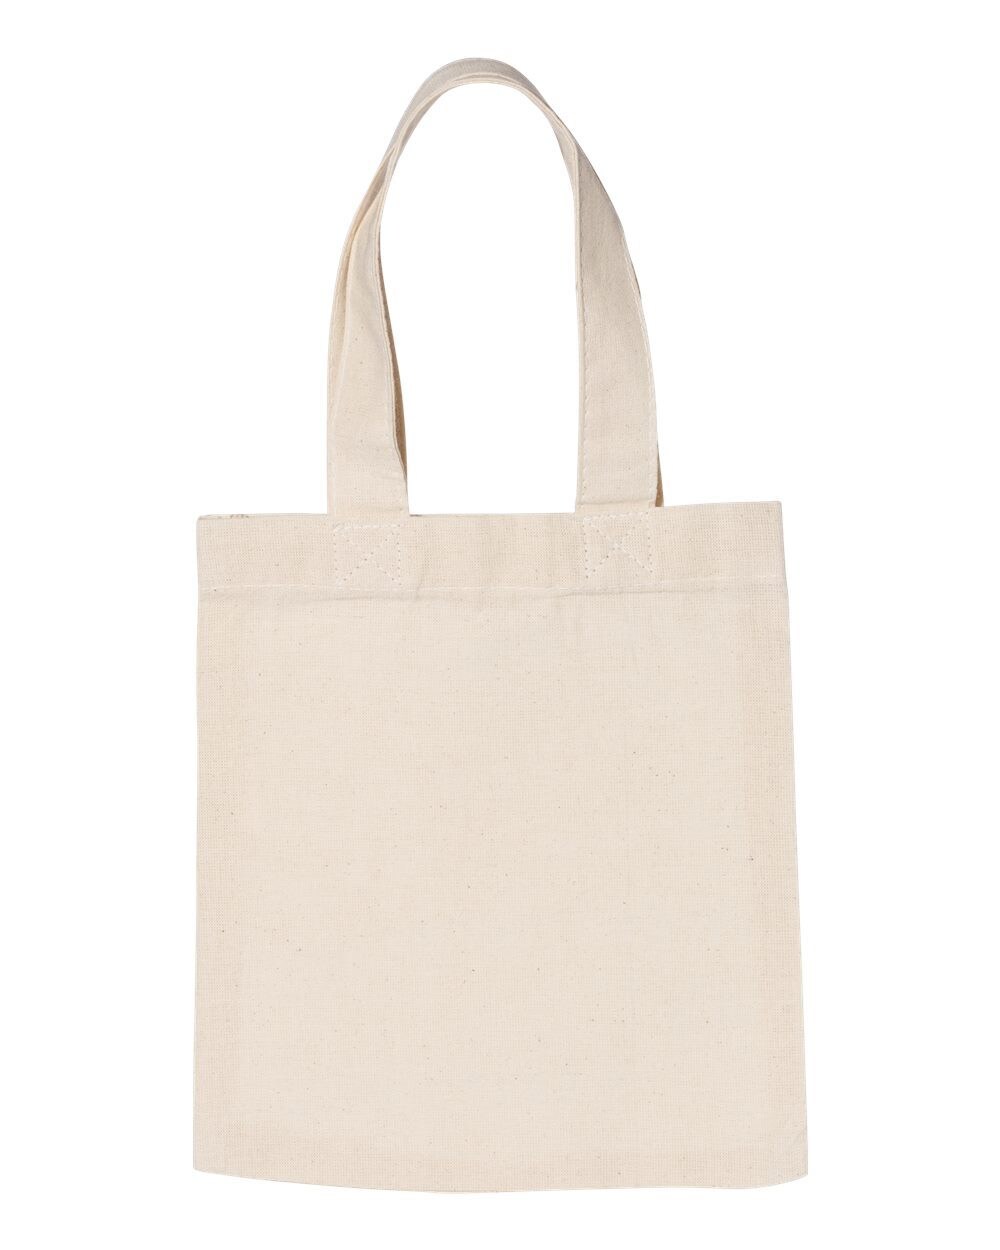 Small Canvas Tote for Marketing Ease | 6 Oz./lyd, 100% Cotton Canvas, 13" Self-Fabric Handles | MINA®